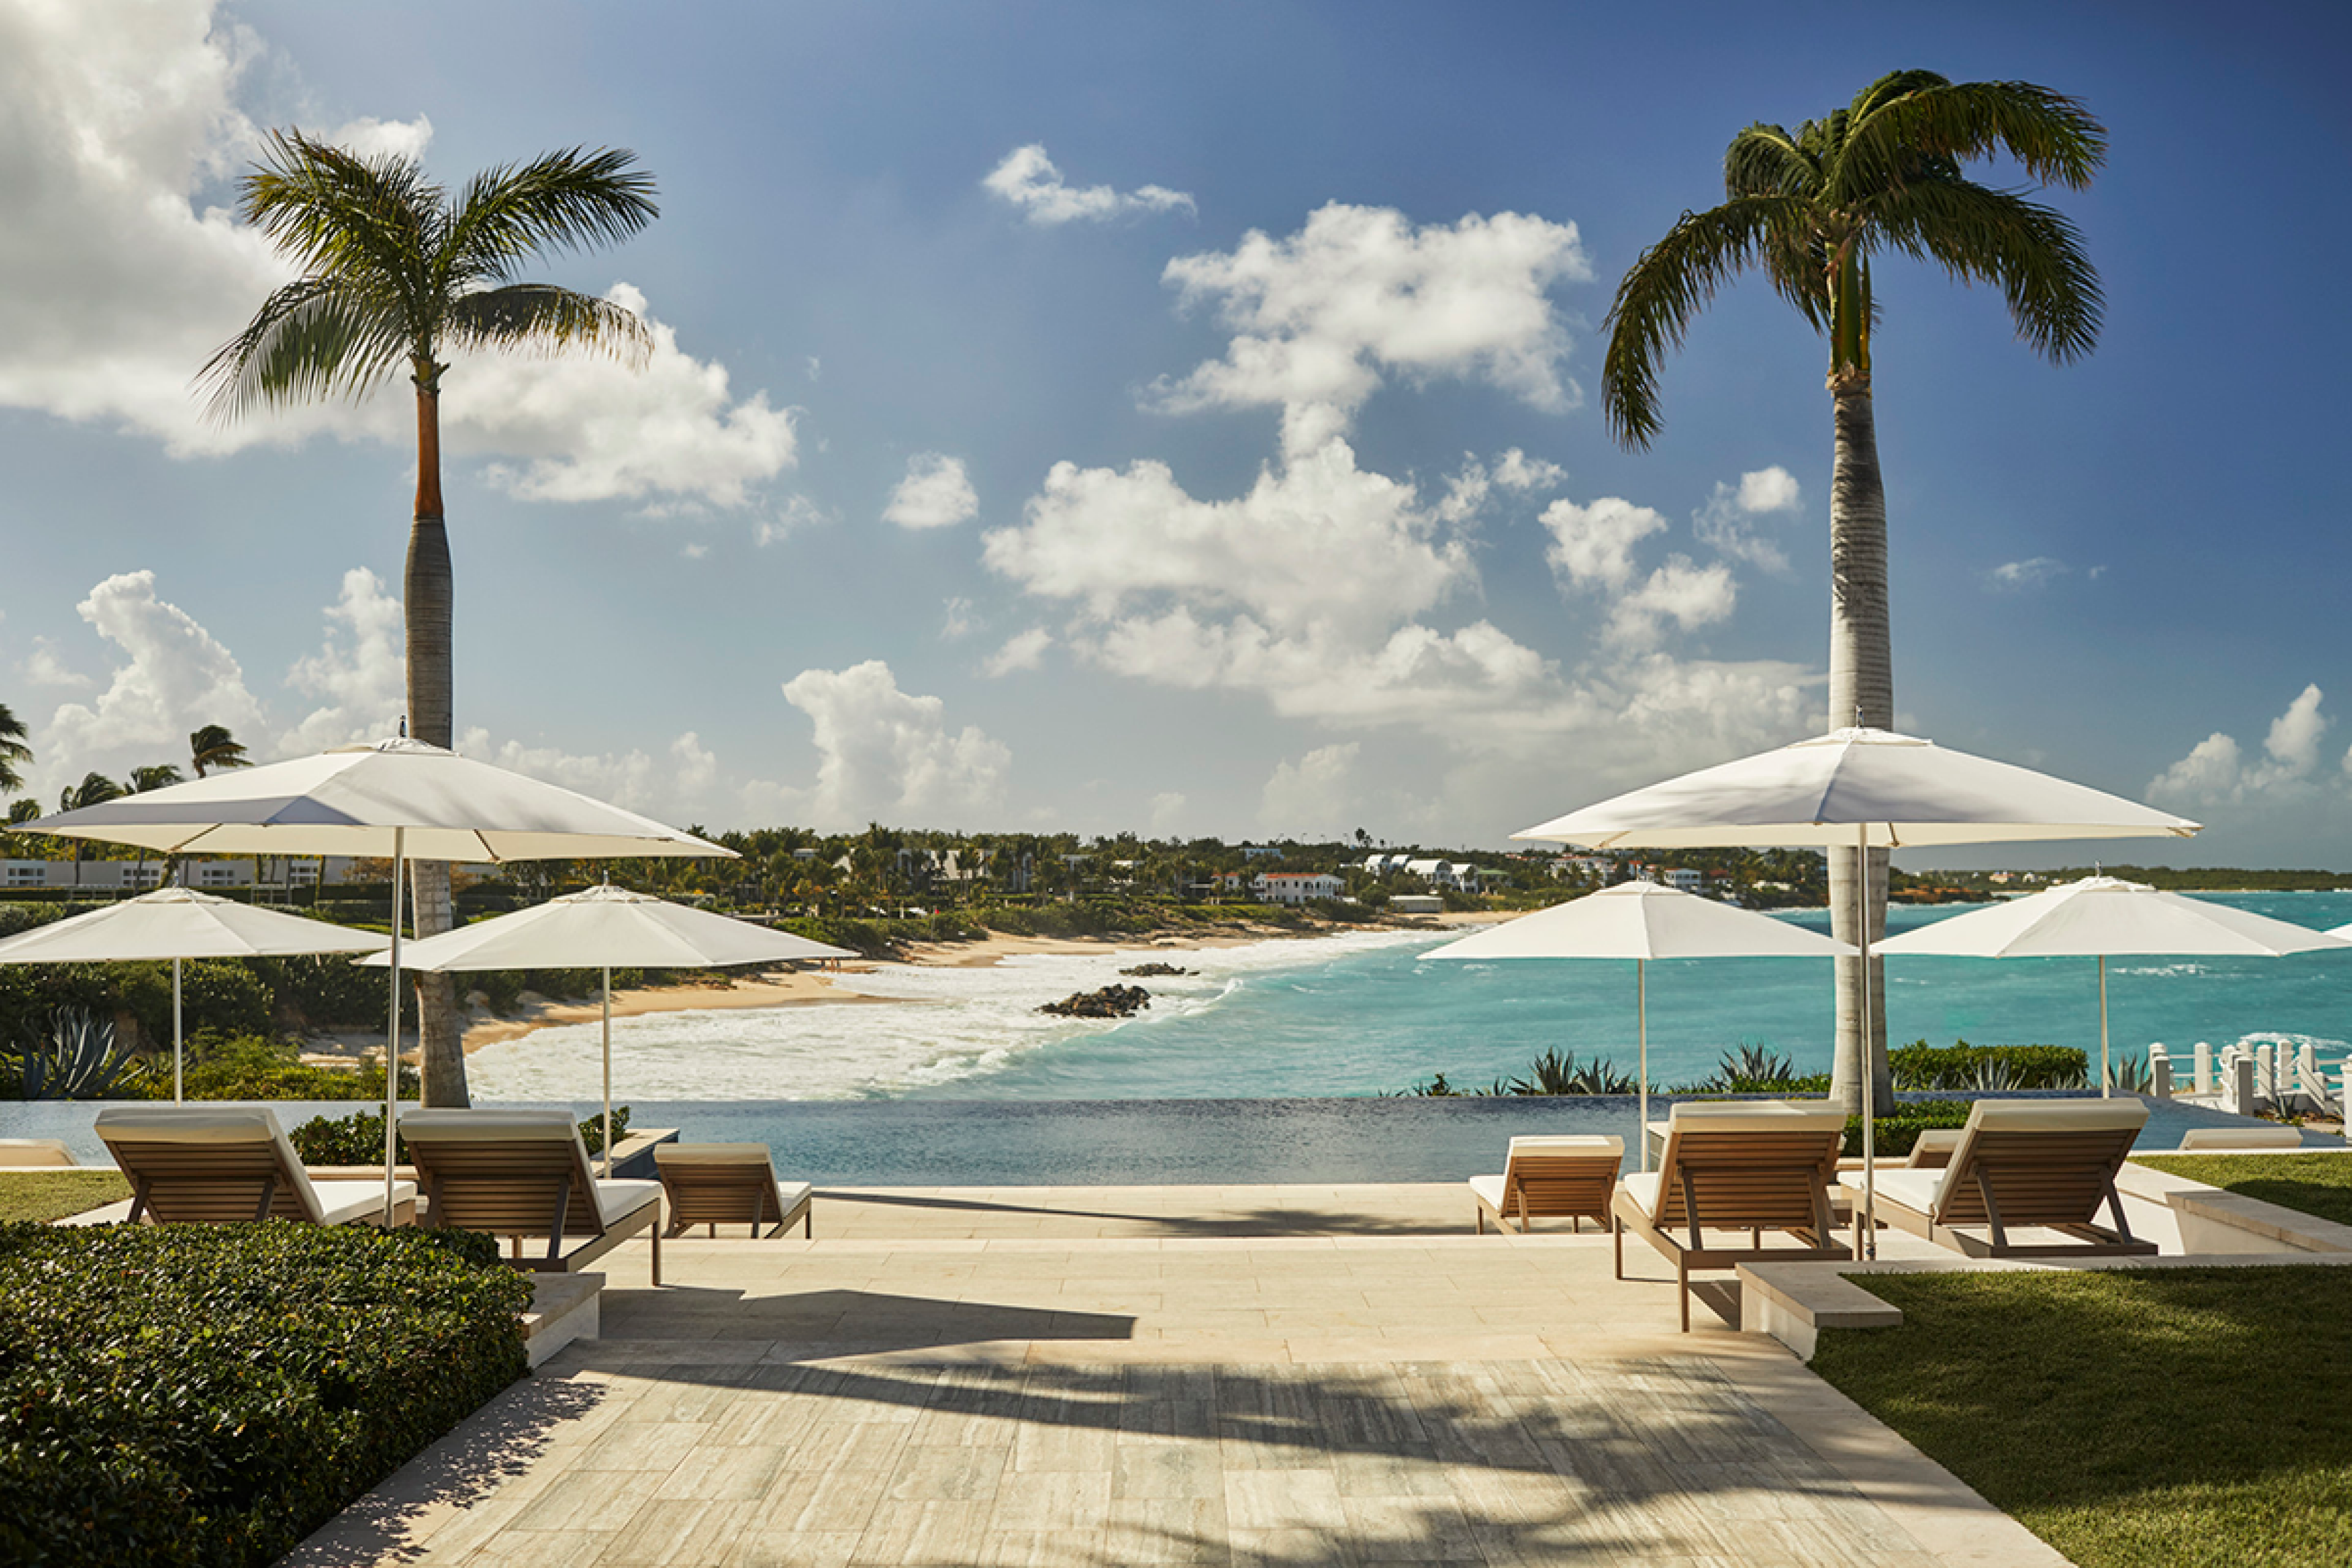 Pool deck with lounge chairs and white umbrellas overlooks the ocean